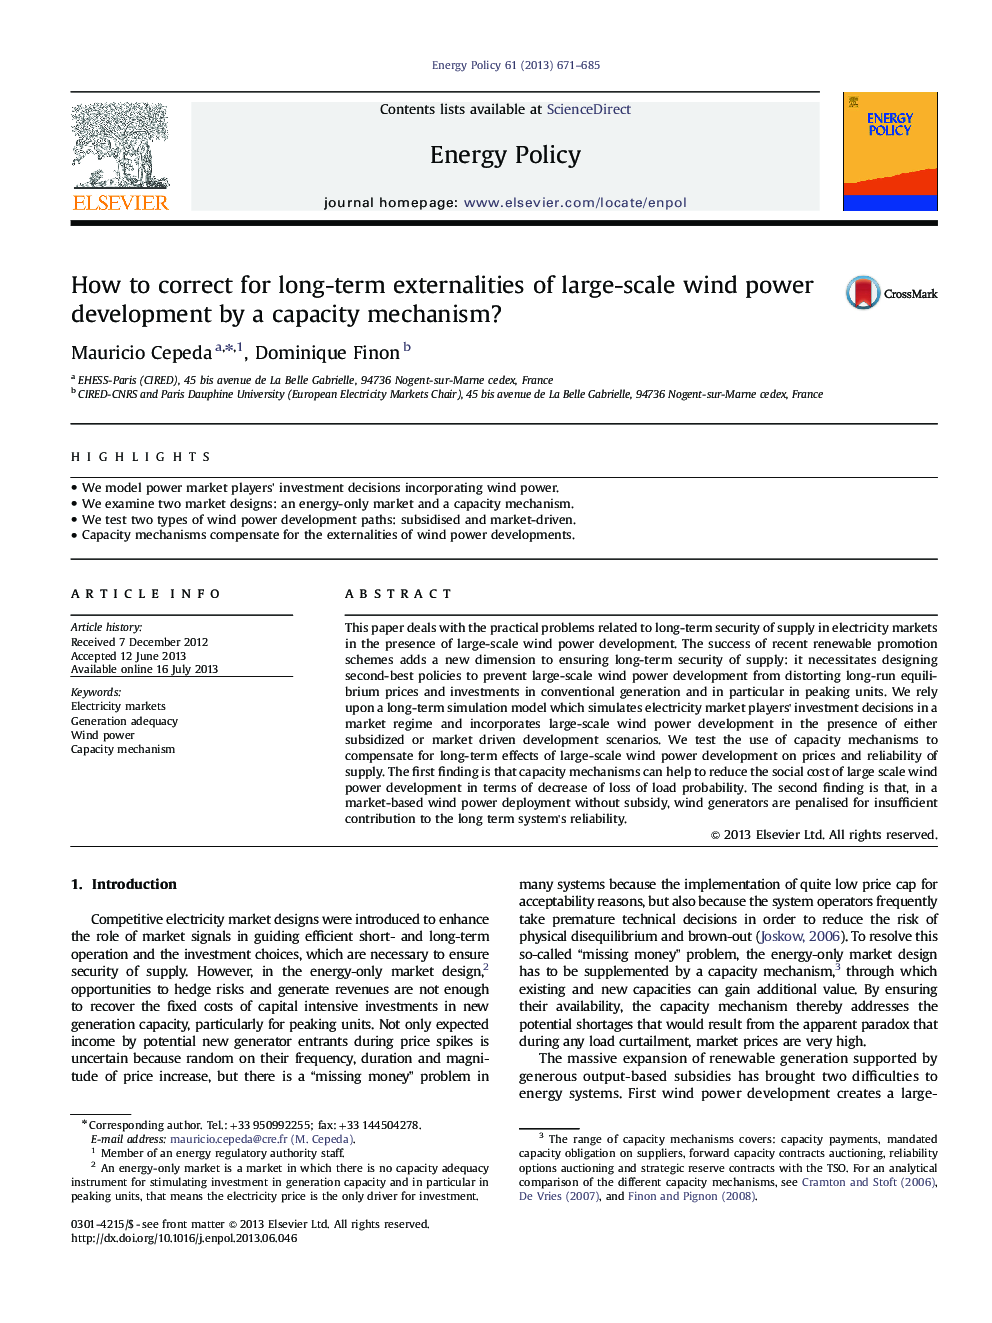 How to correct for long-term externalities of large-scale wind power development by a capacity mechanism?